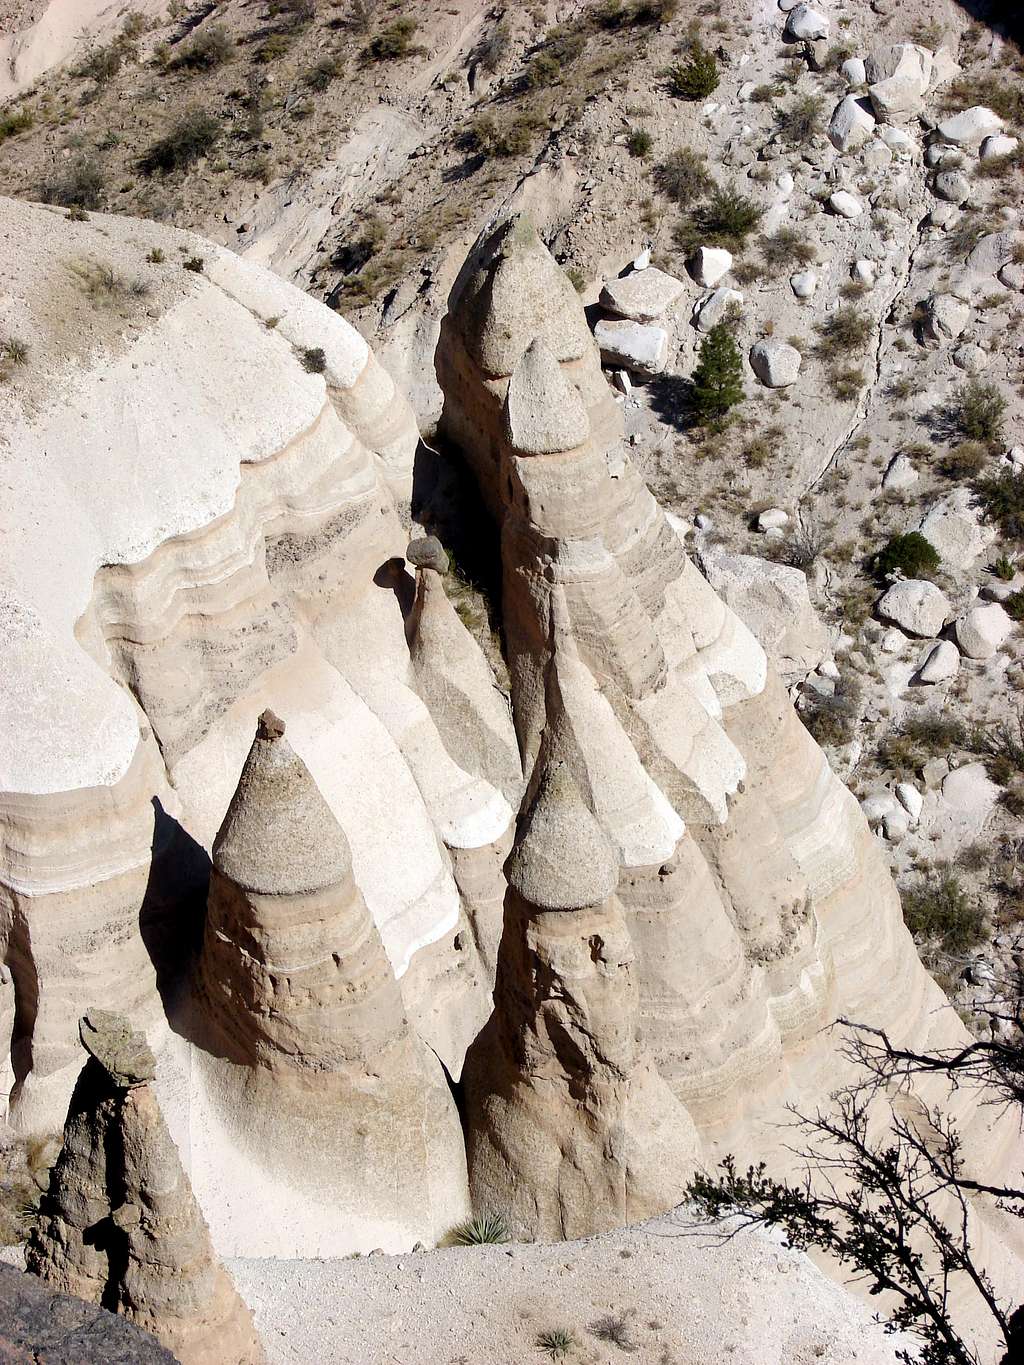 Above the Tent Rocks